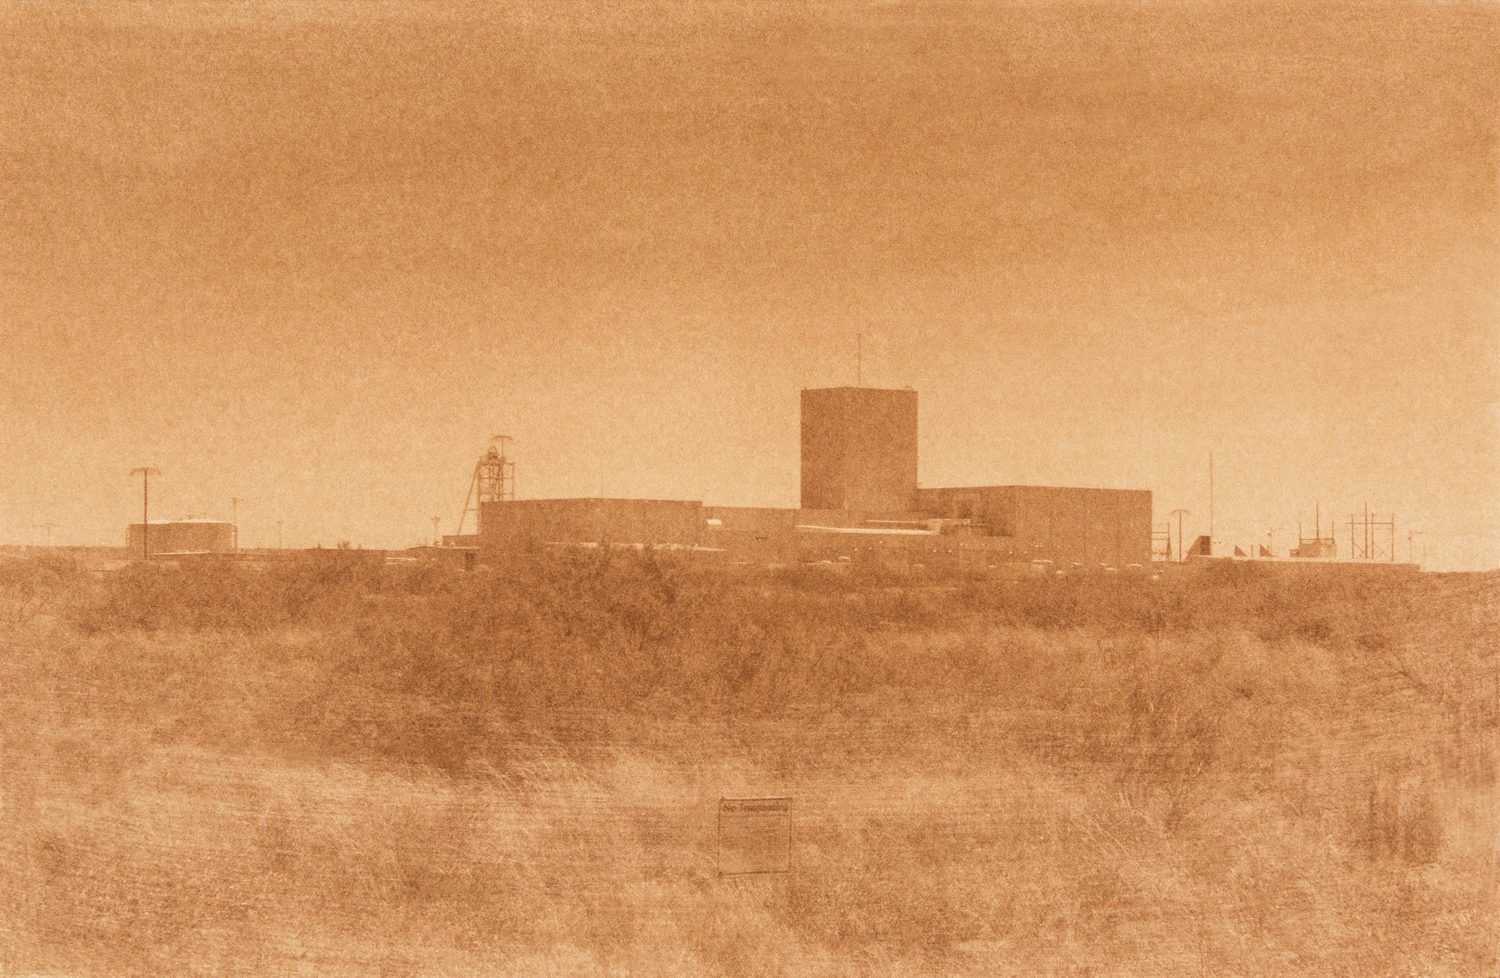  Waste Isolation Pilot Plant 2, Carlsbad, New Mexico, Amount of waste emplaced to date: 24,035,165 Gallons 2014, 9”x13” Uranotype (uranium print) 